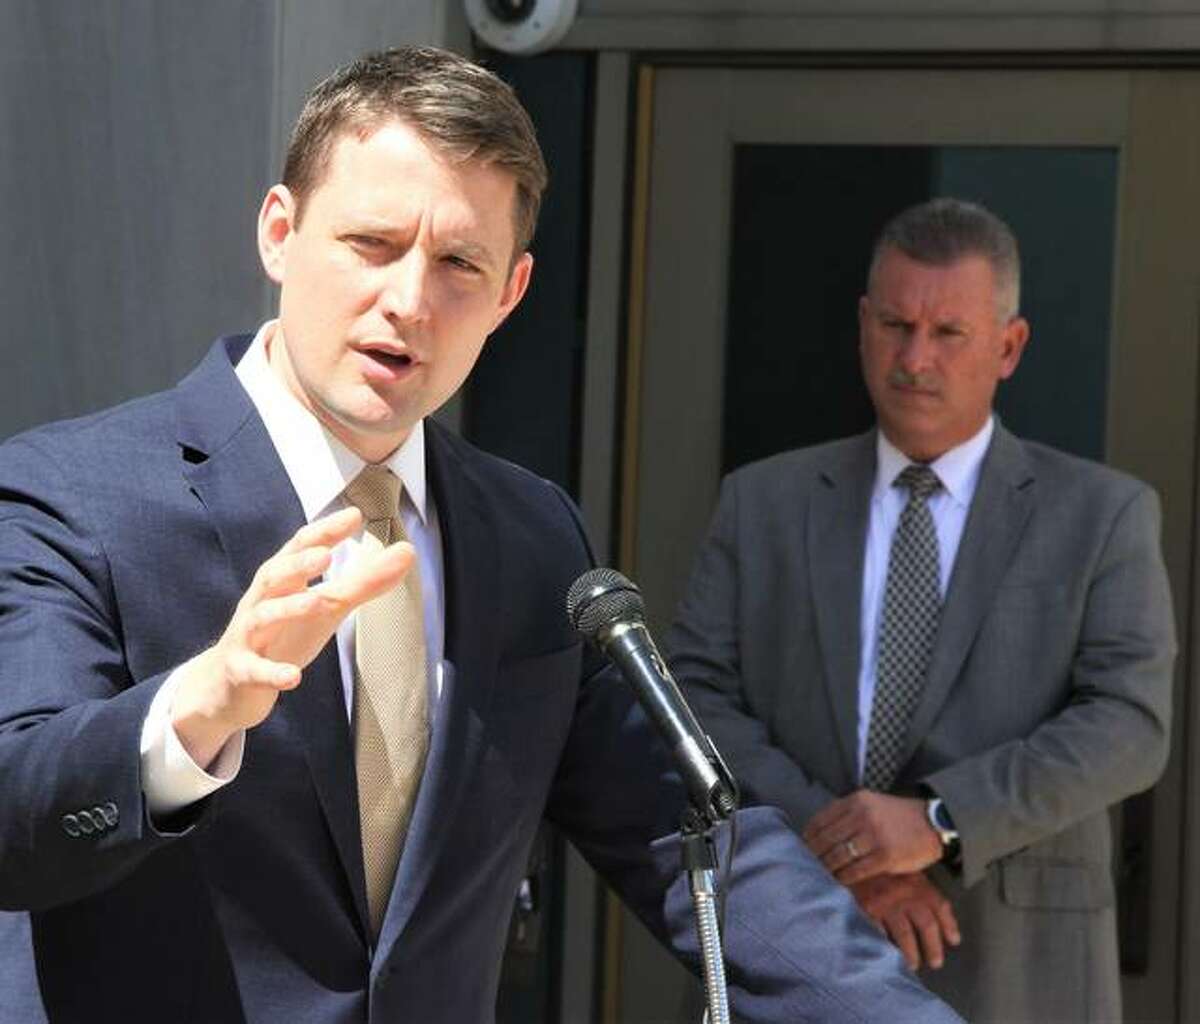 Madison County State’s Attorney Tom Haine speaks while Maj. Jeff Connor, head of the Madison County Cross-River Task Force, watches during a recent press conference. Haine released some statistics on the problem, while Connor said they are gearing up for the first enforcement action.